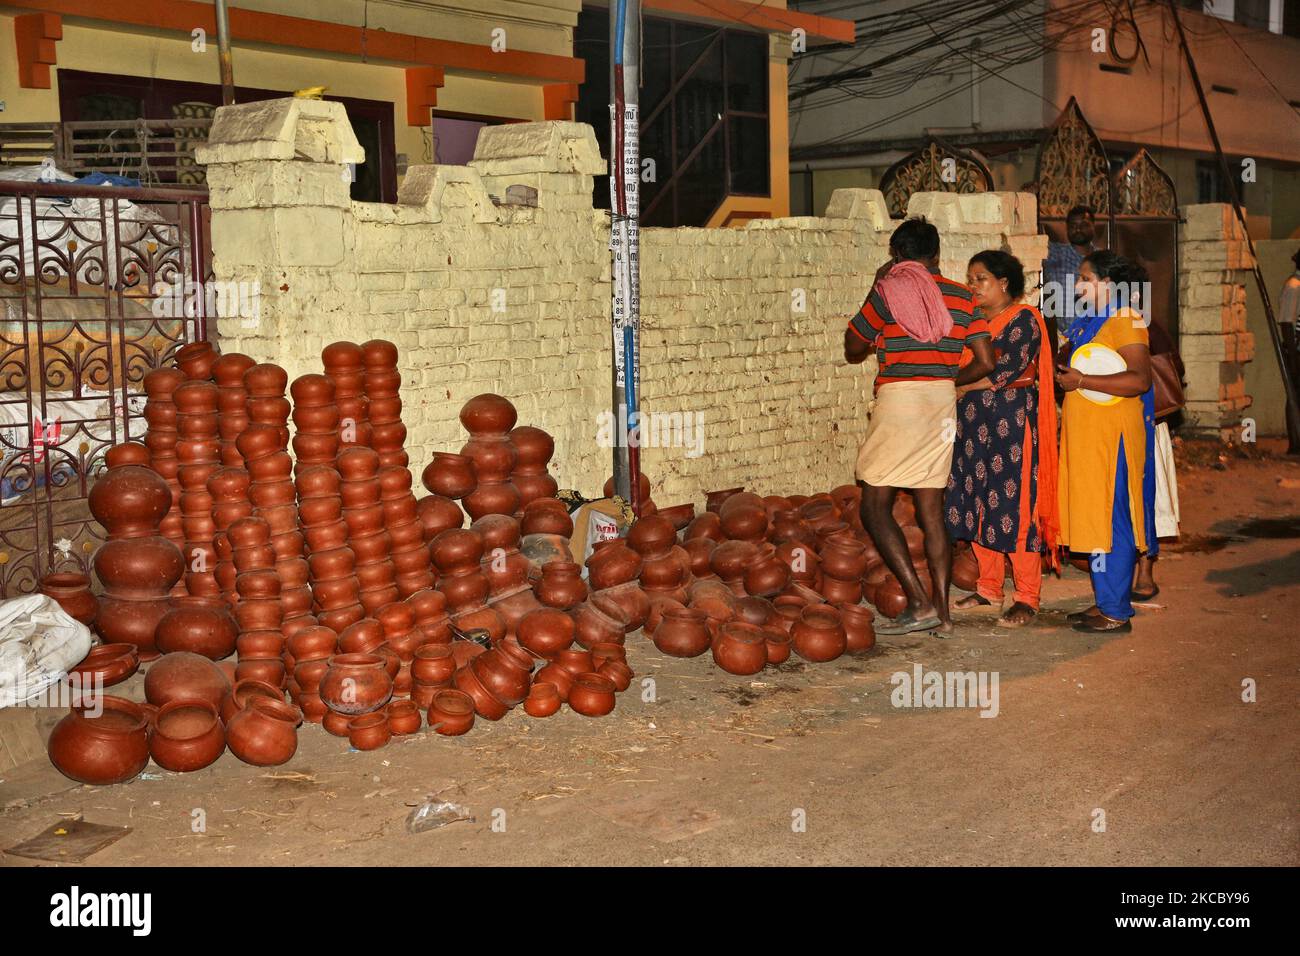 Clay pots are used for cooking in a busy street during the Pongala festival  Stock Photo - Alamy